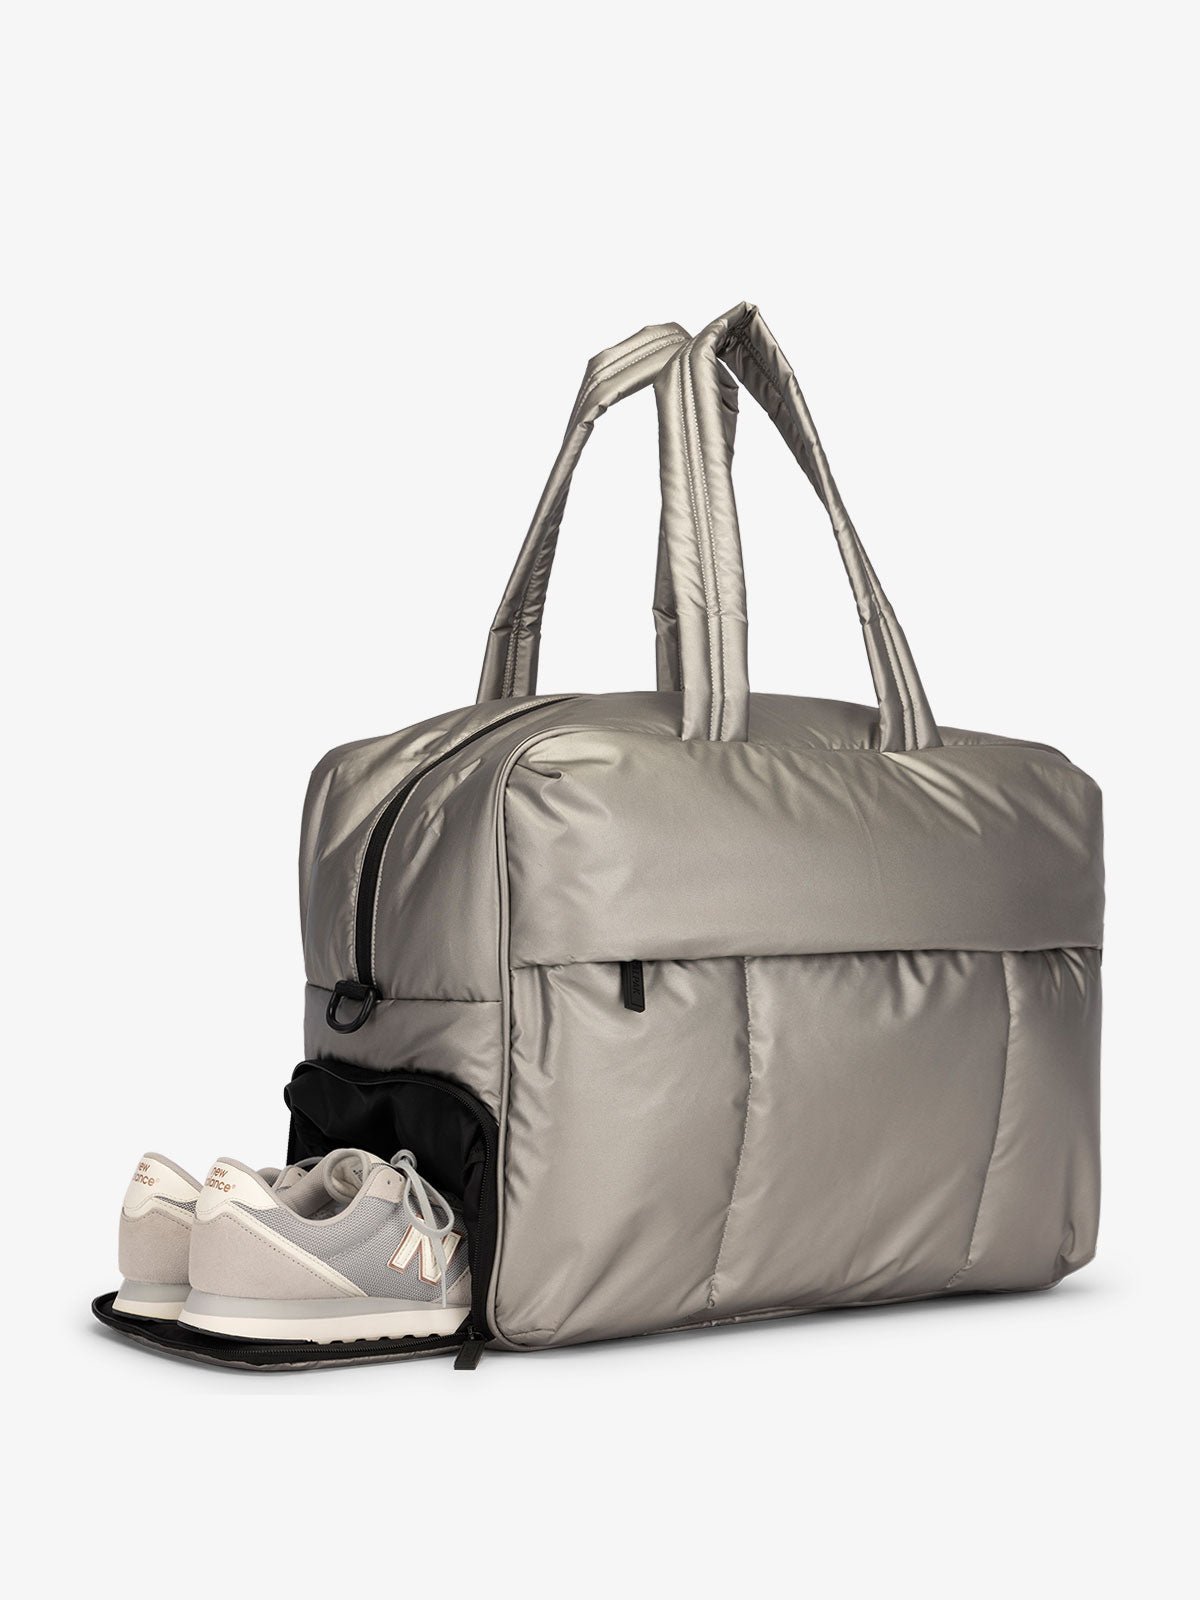 CALPAK Luka large duffel bag with side shoe compartment and dual handles in silver gunmetal